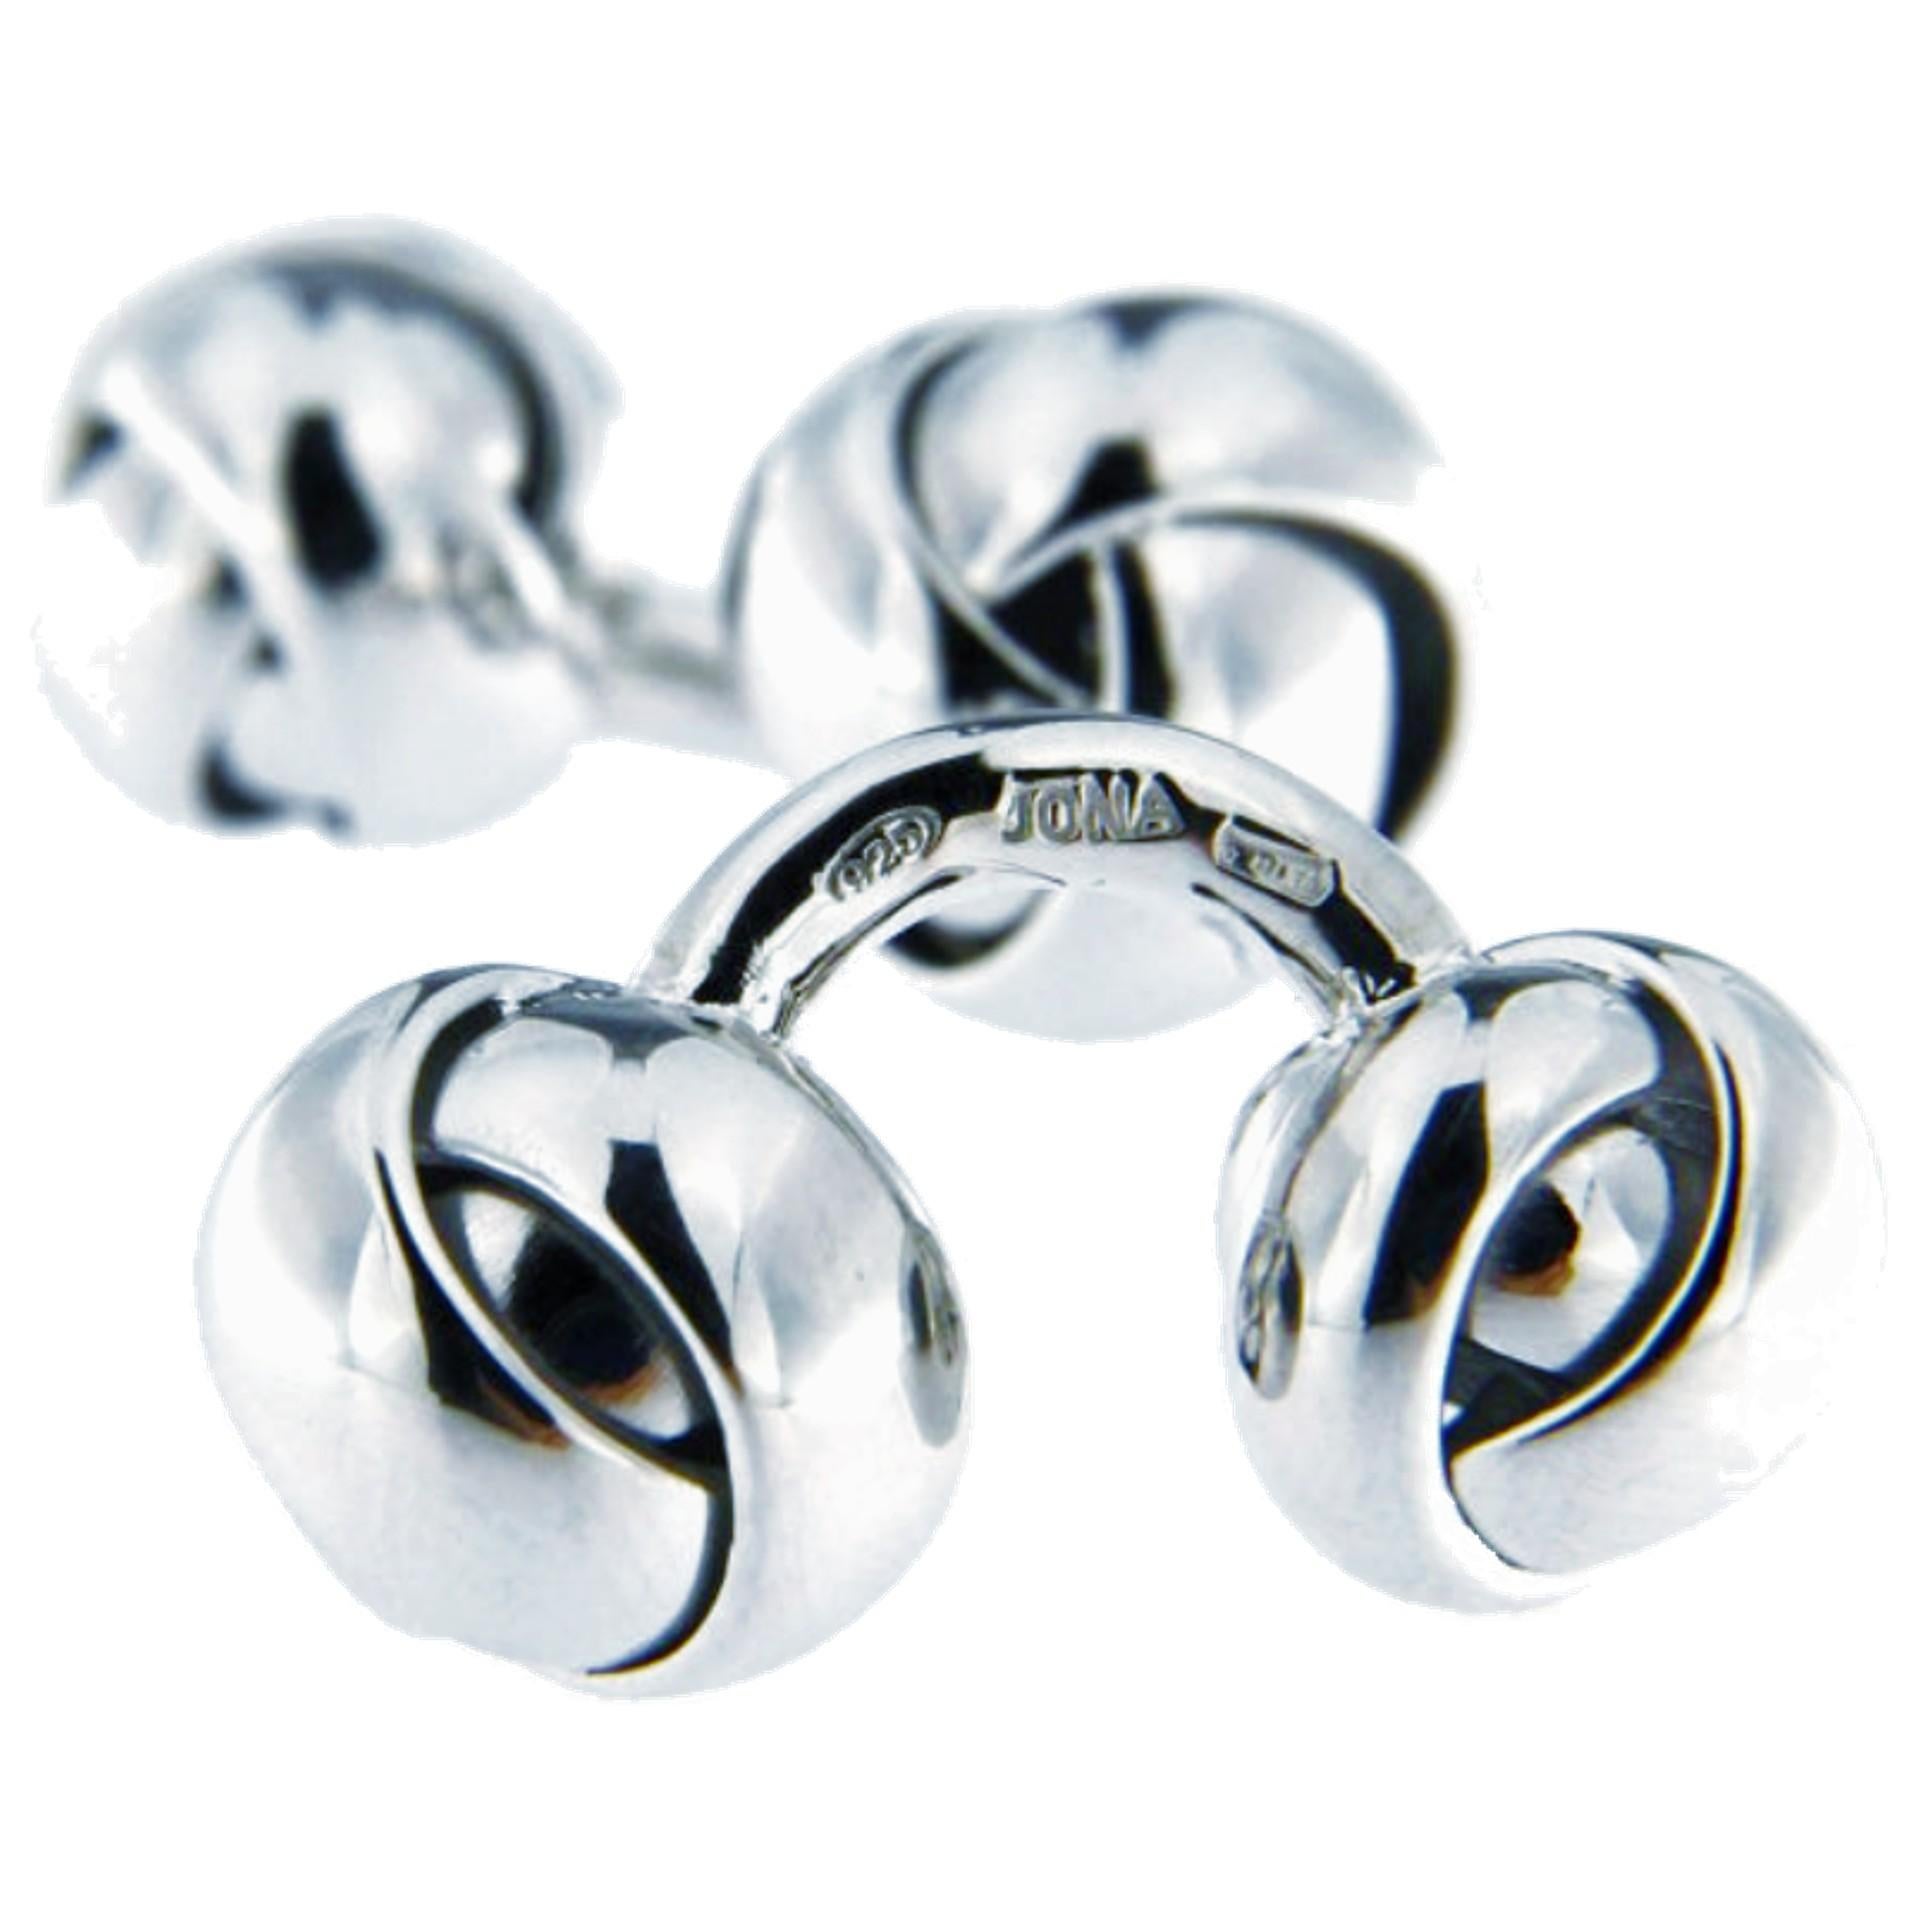 Alex Jona Silver Knot Cufflinks In New Condition For Sale In Torino, IT